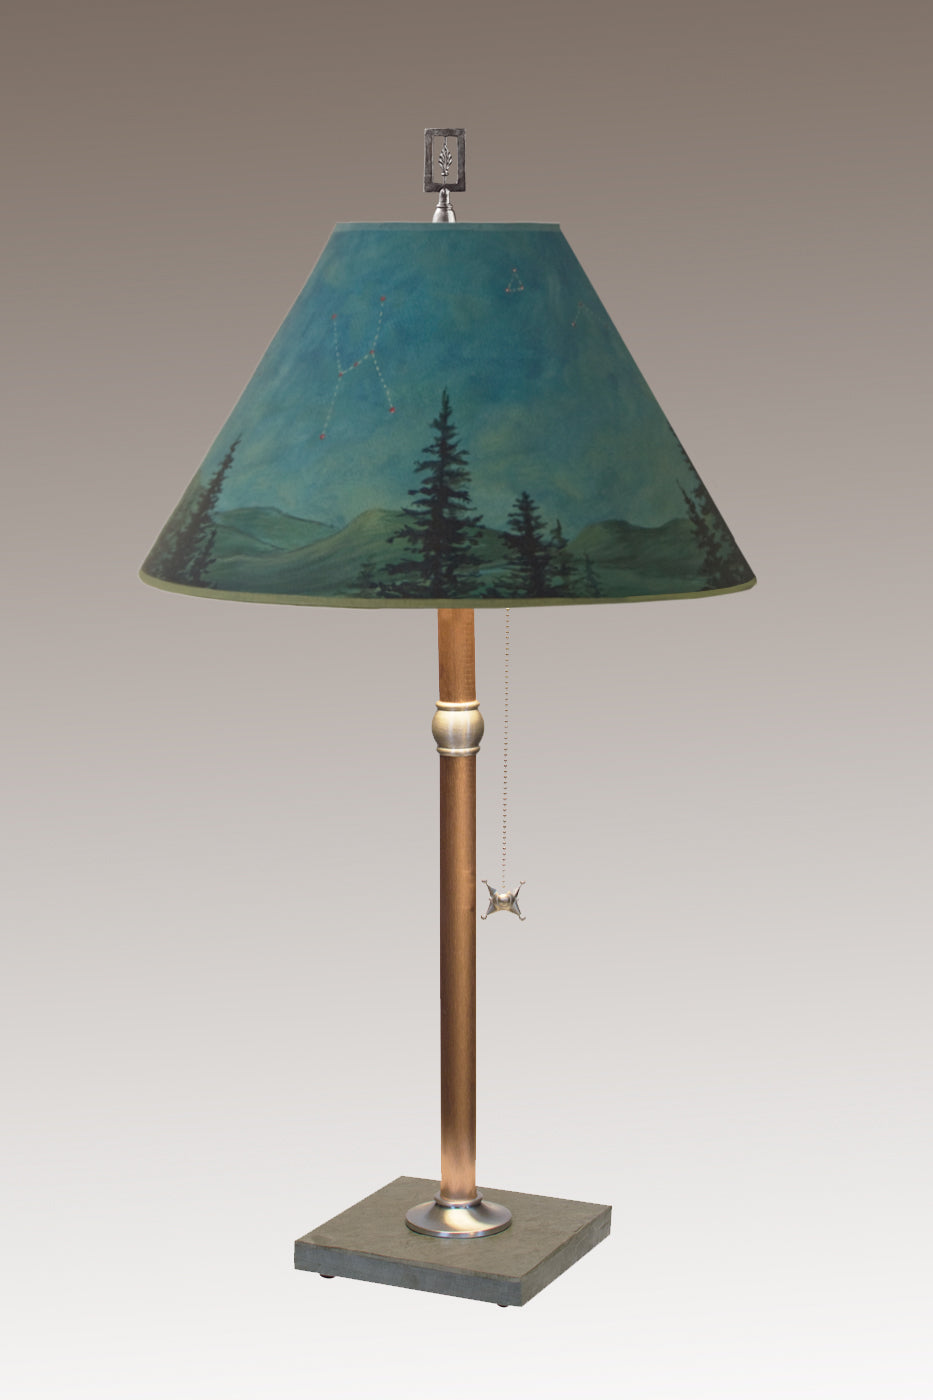 Copper Table Lamp with Medium Conical Shade in Midnight